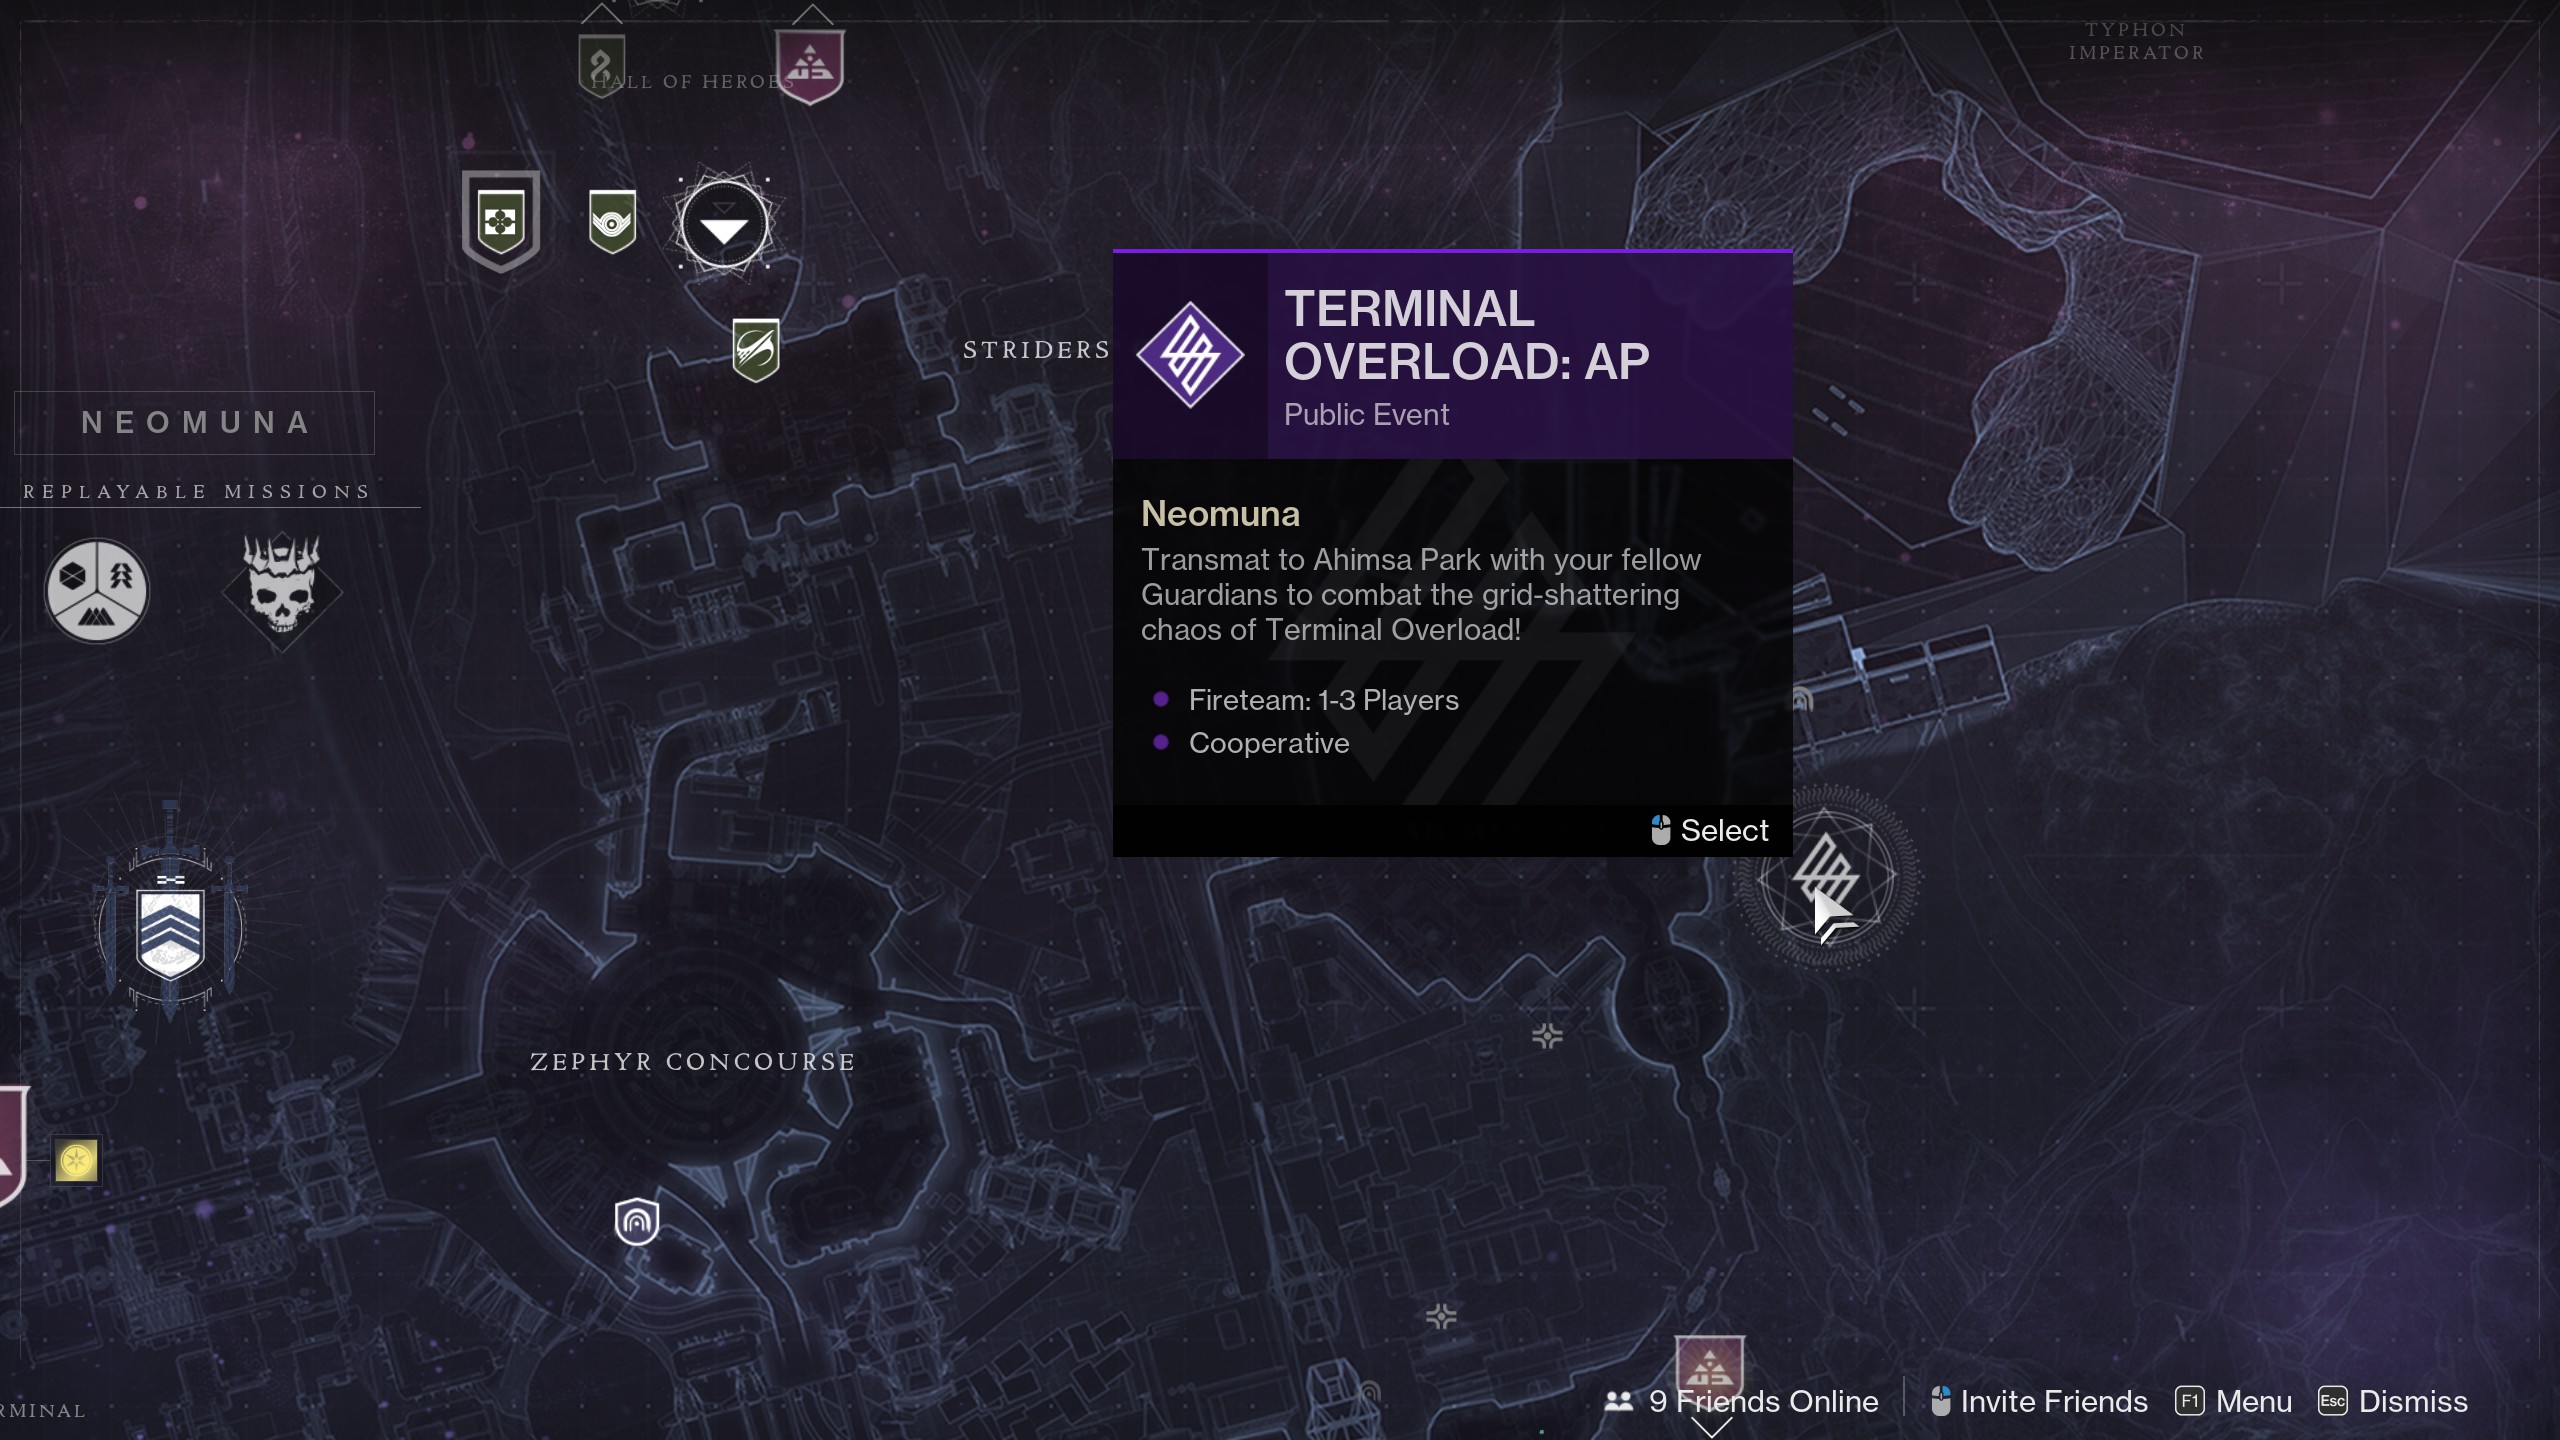 Destiny 2 Terminal Overload event on map